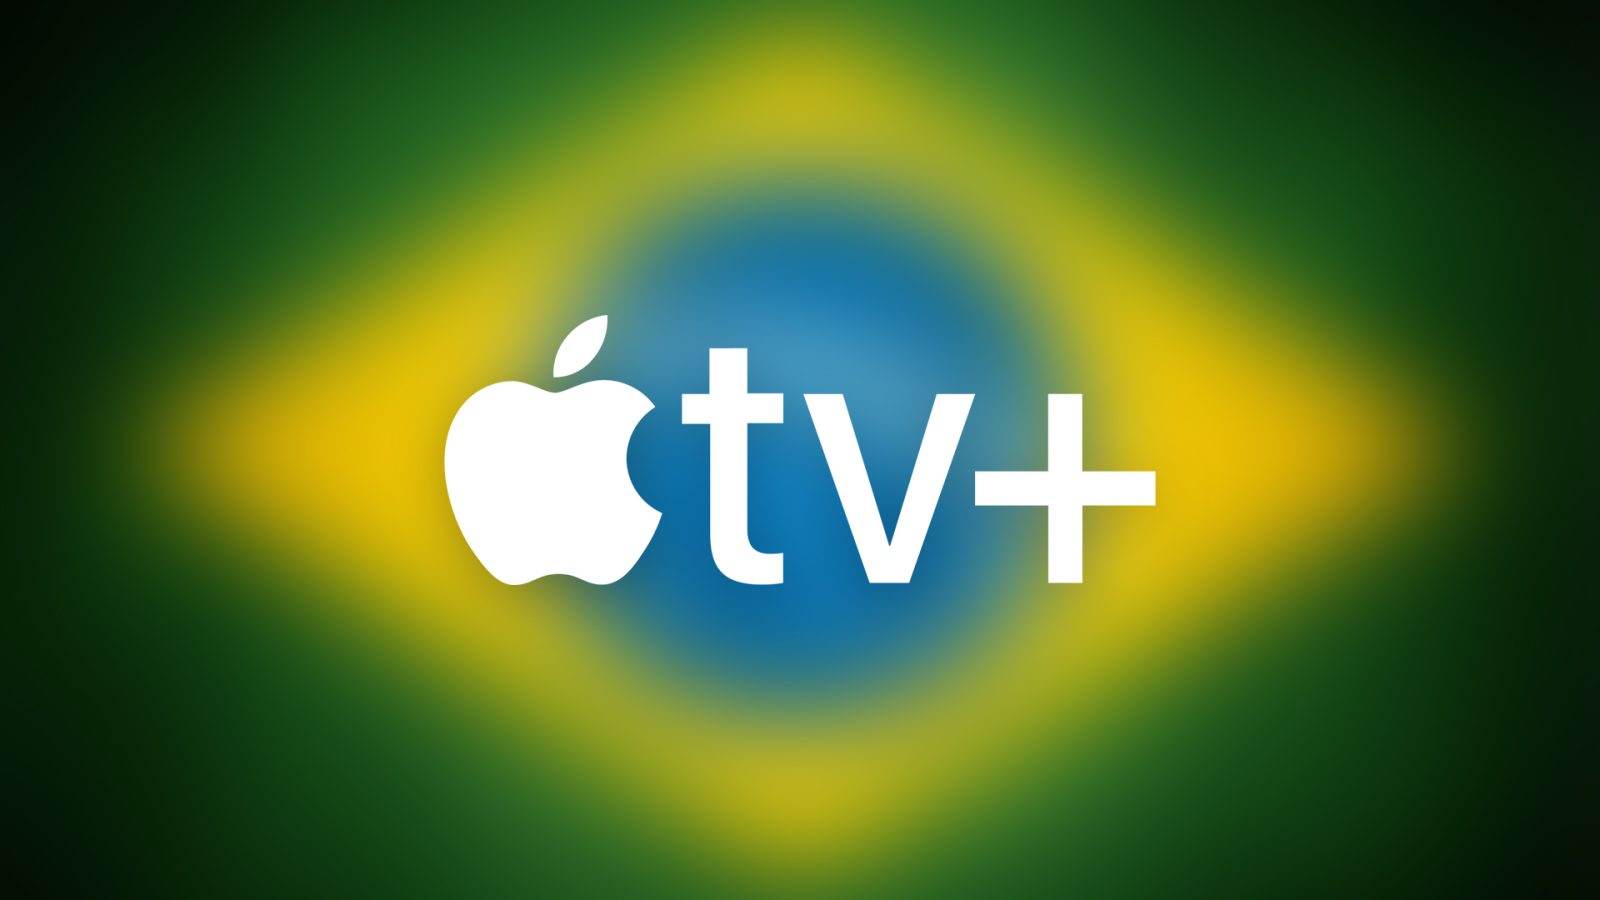 Apple TV+ reportedly in talks for its first content made in Brazil